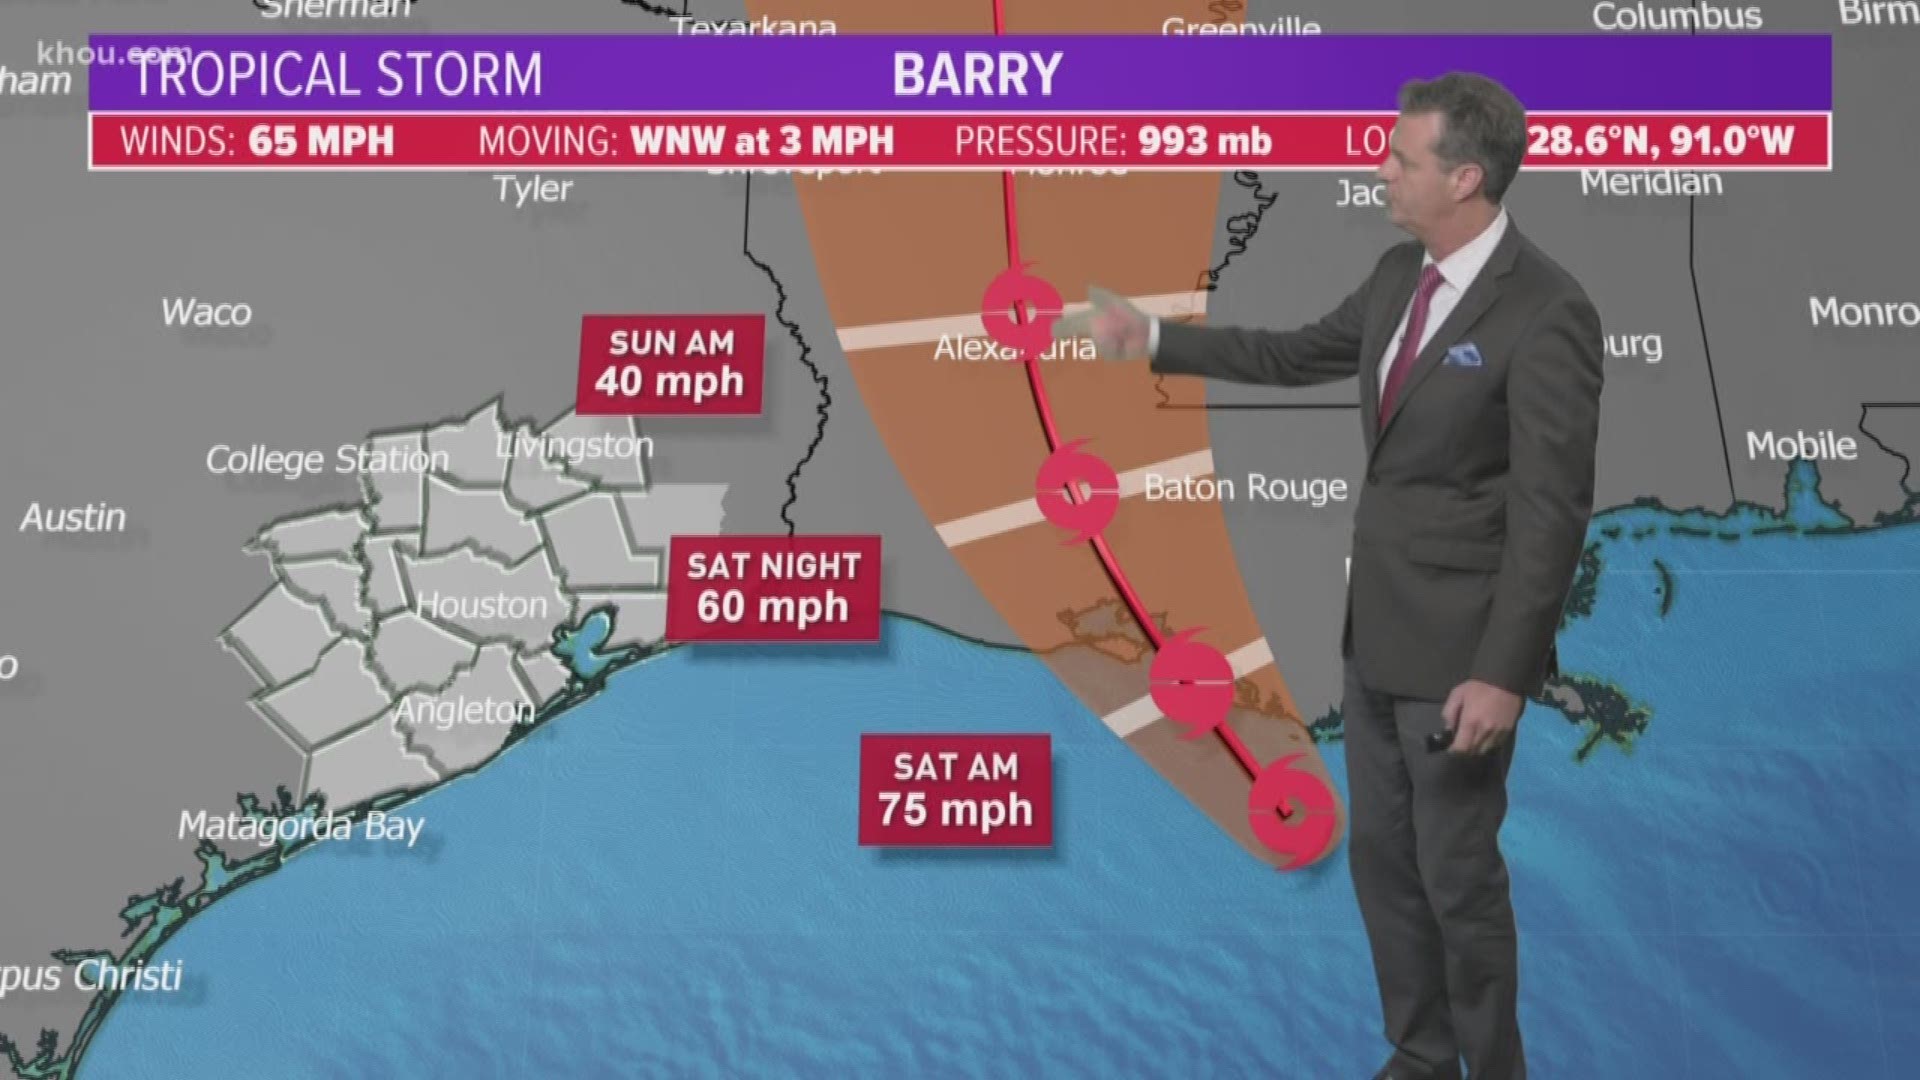 Barry is expected to make landfall early Saturday morning with winds near Category 1 hurricane force of 70-75 mph. Houston is on the dry side of the storm, but that doesn't mean we won't see scattered thunderstorms from time to time.